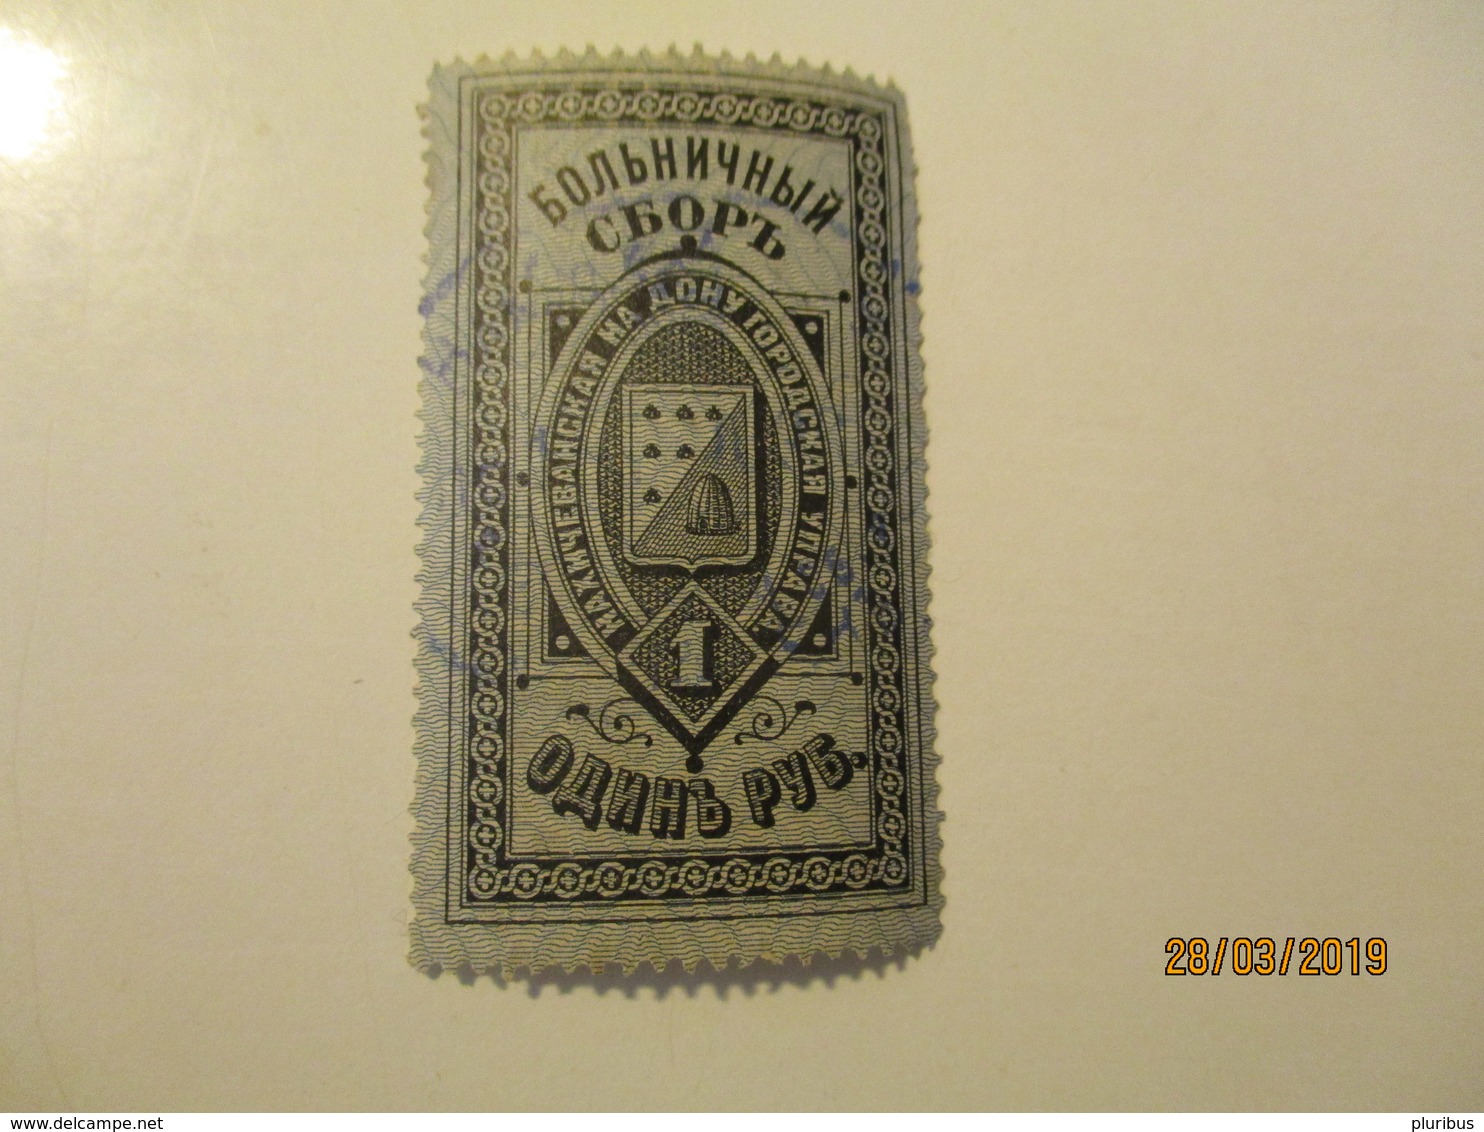 RARE!  NAKHICHEVAN ON DON , ARMENIAN PART OF ROSTOV ON DON , REVENUE TAX HOSPITAL STAMP , BEE HIVE ON COAT OF ARMS ,0 - Steuermarken